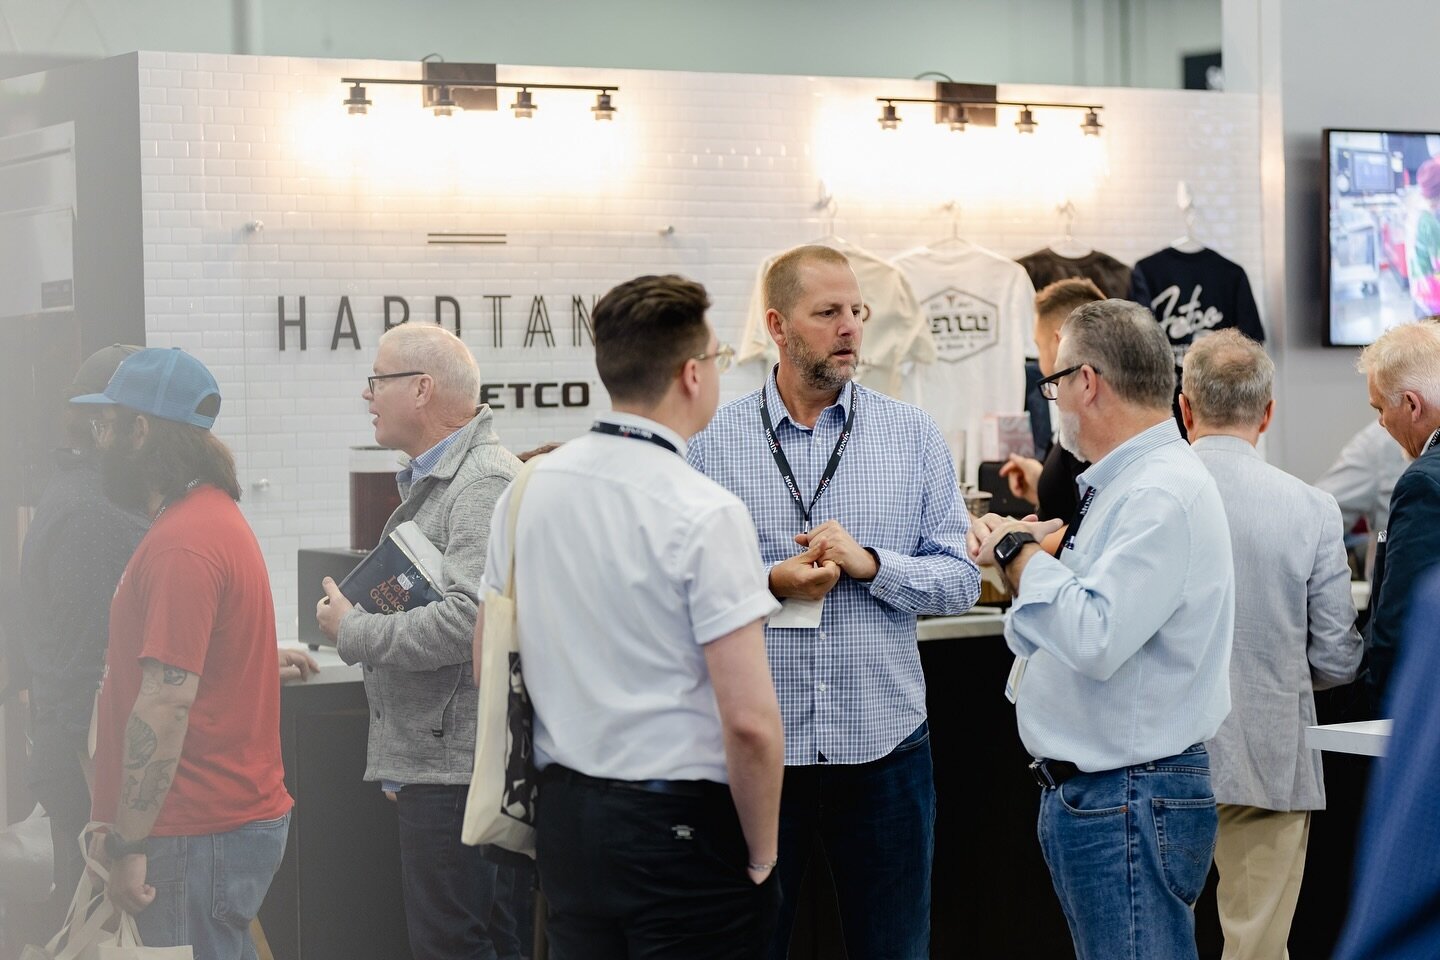 Attending the @barandrestaurantexpo next week? Stop by and see us at booth #1250 or in the Cocktail Clubhouse! We&rsquo;ll be demonstrating the Baby Hardtank and Brood units for use in bars, restaurants, hospitality and more.

We look forward to seei